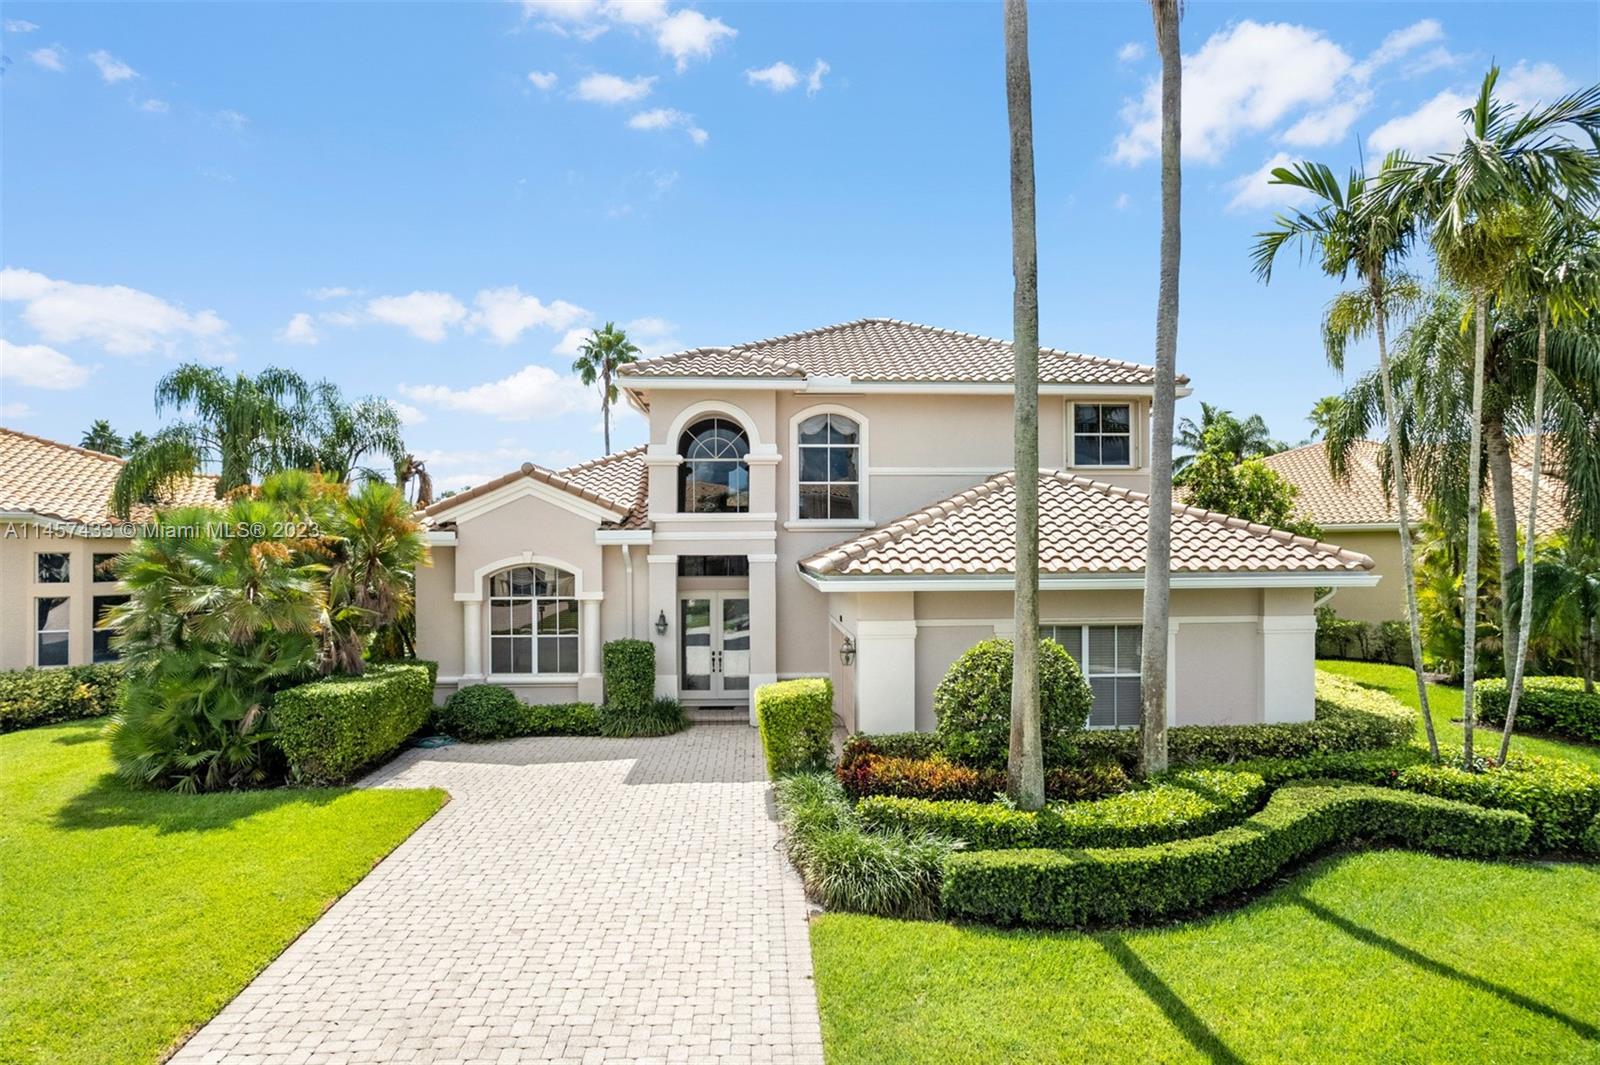 Photo of 1136 Grand Cay Dr in Palm Beach Gardens, FL